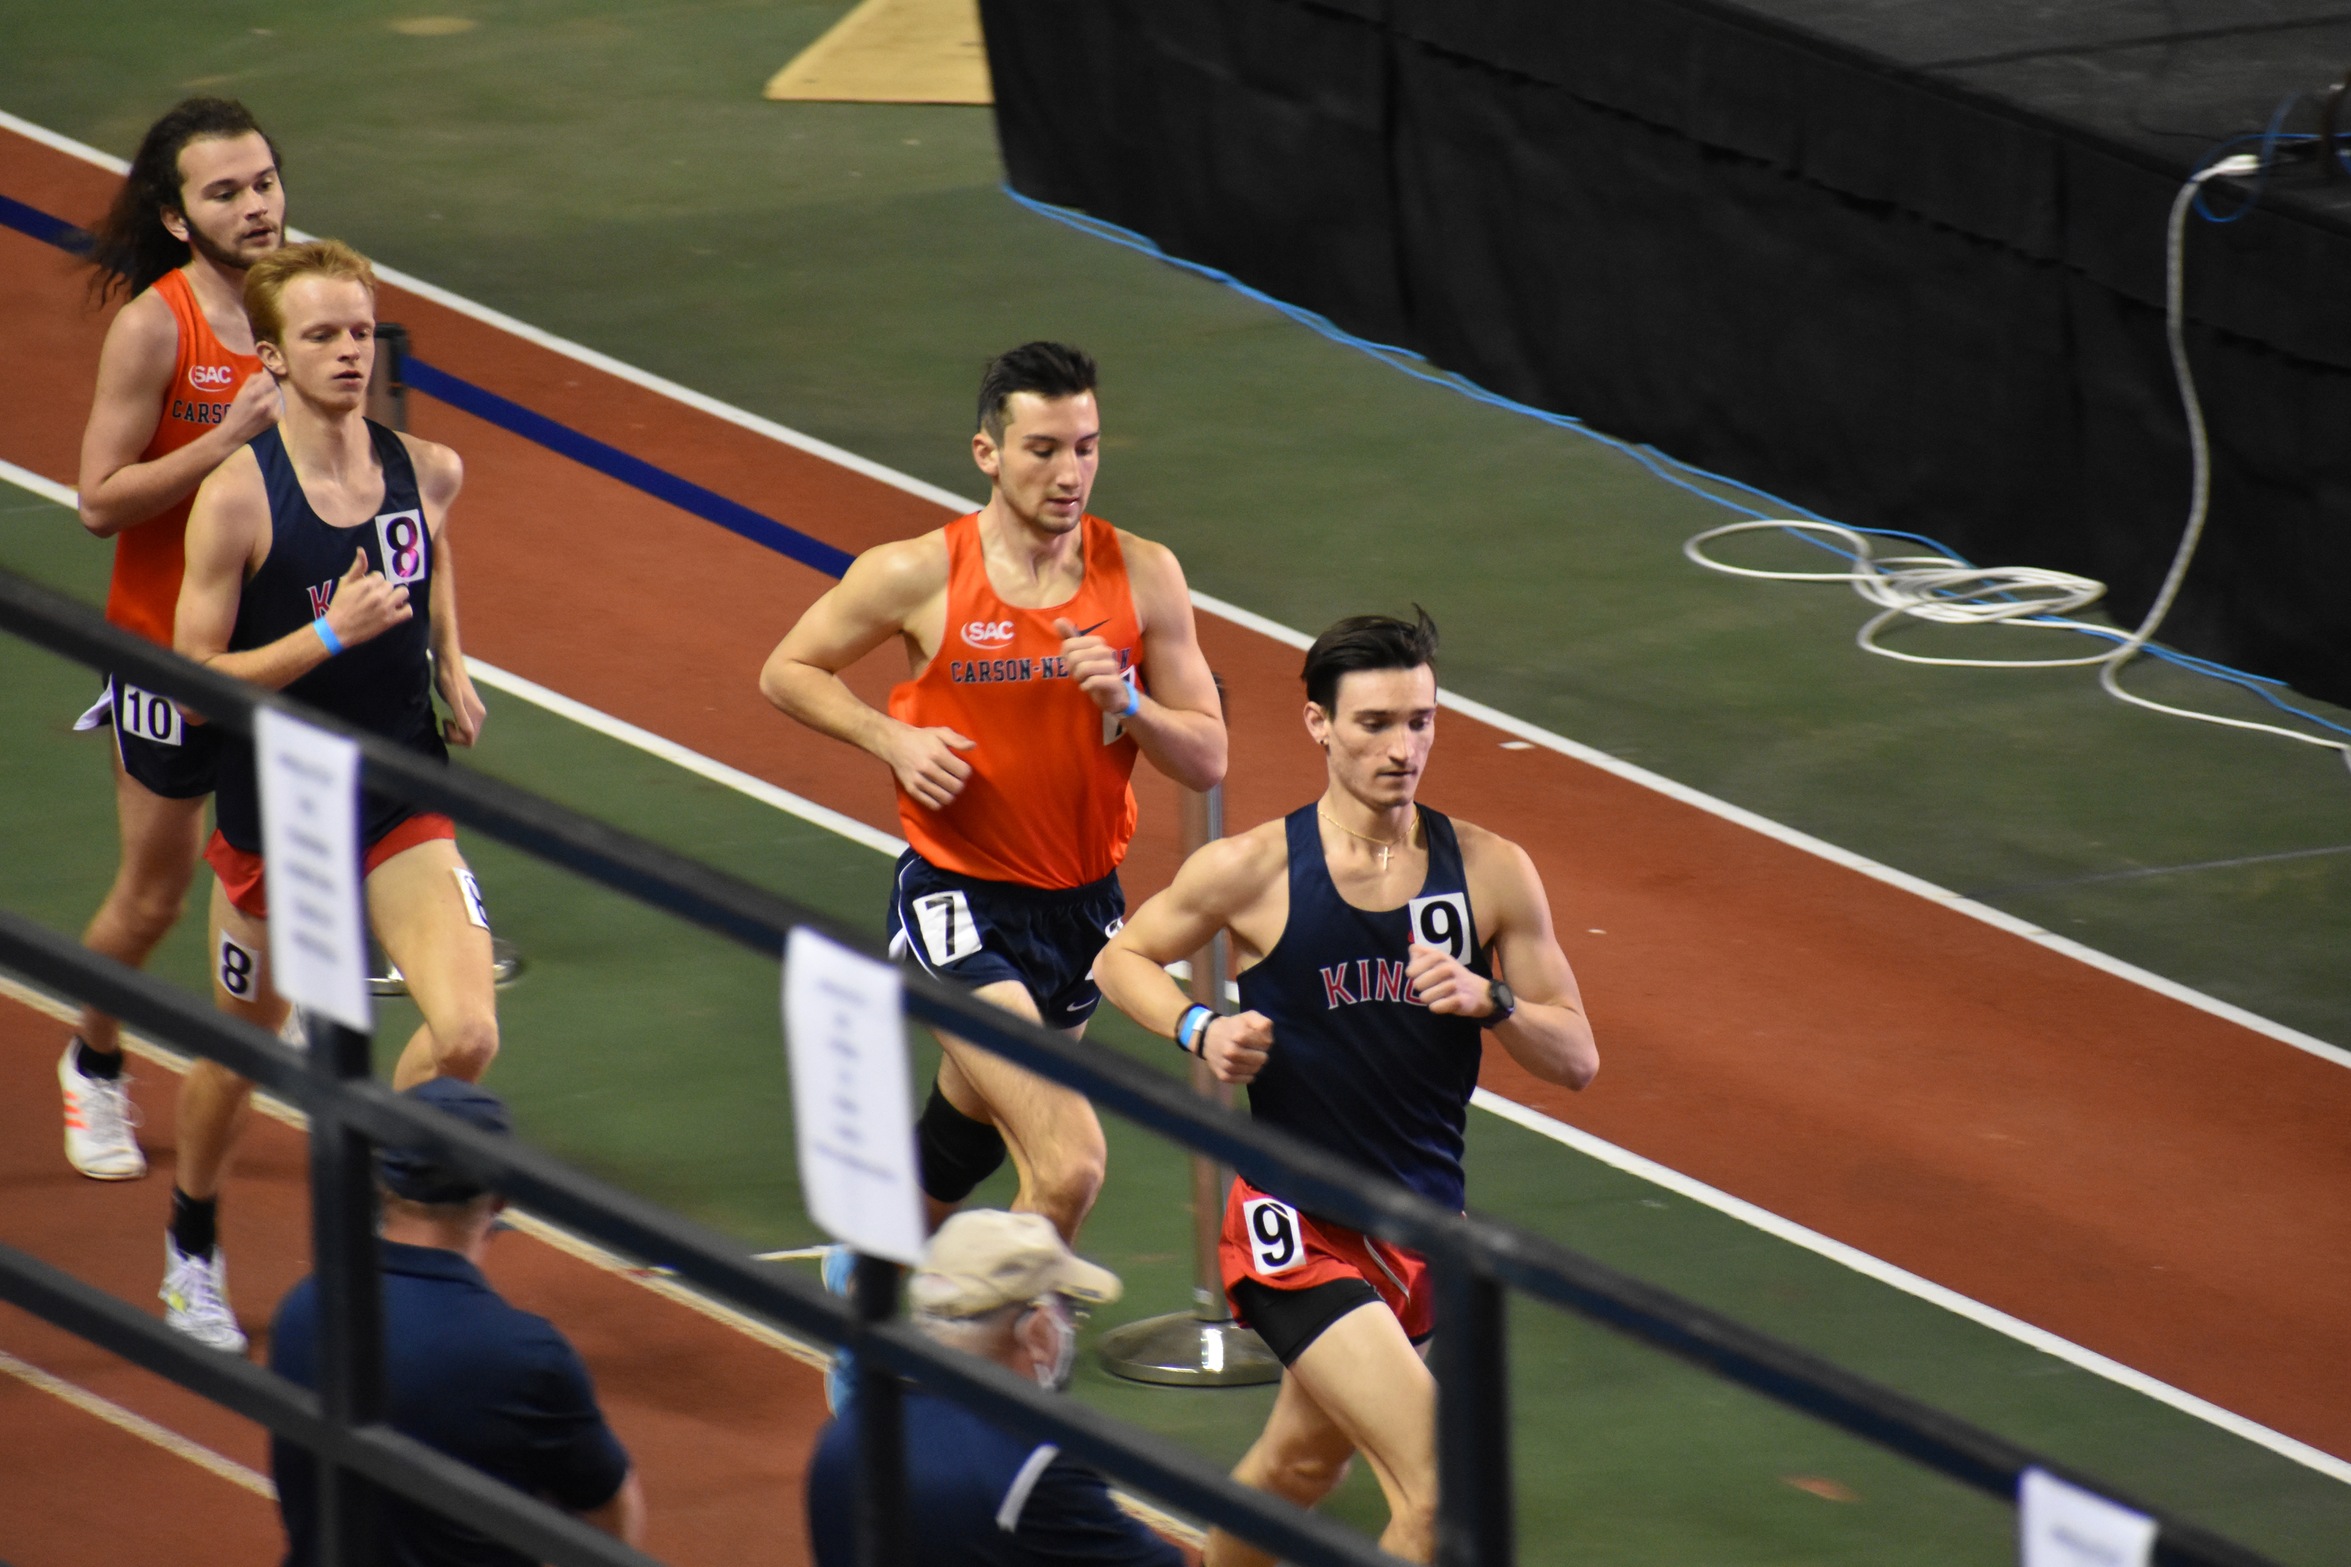 Eagles open indoor season with jaunt to Johnson City